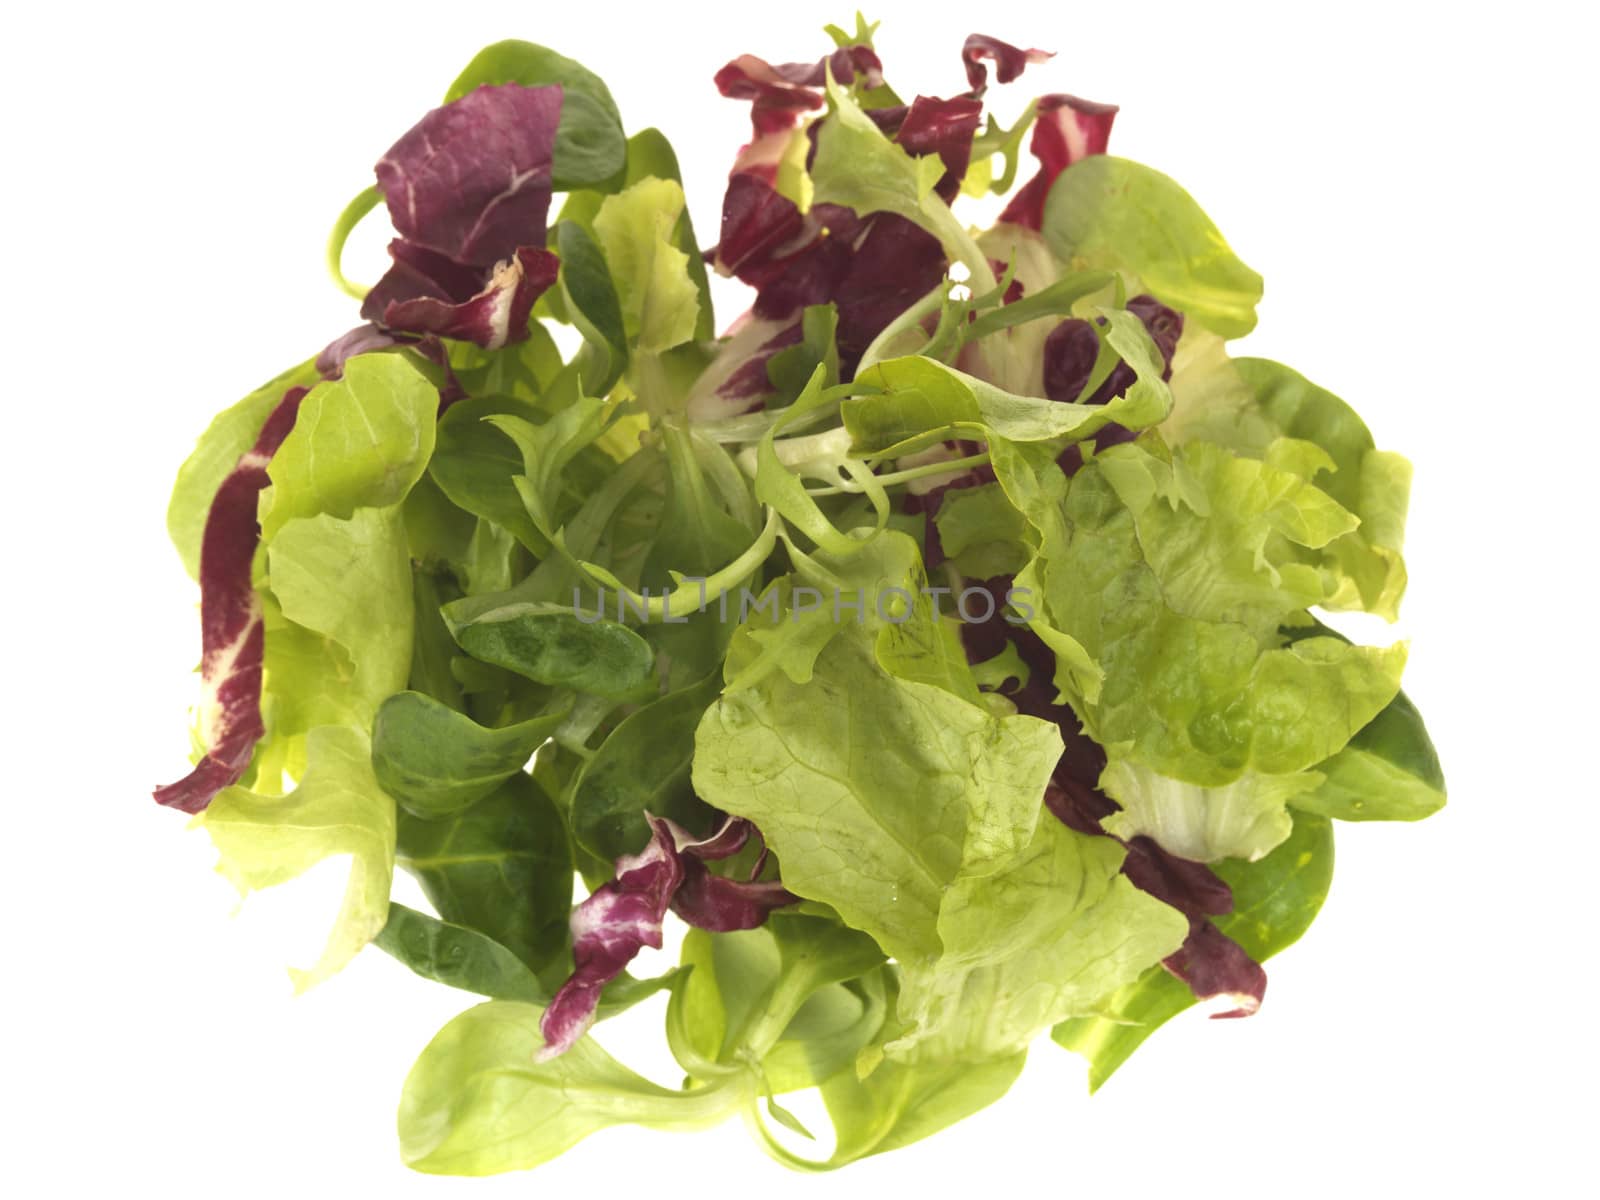 Mixed Salad Lettuce Leaves by Whiteboxmedia